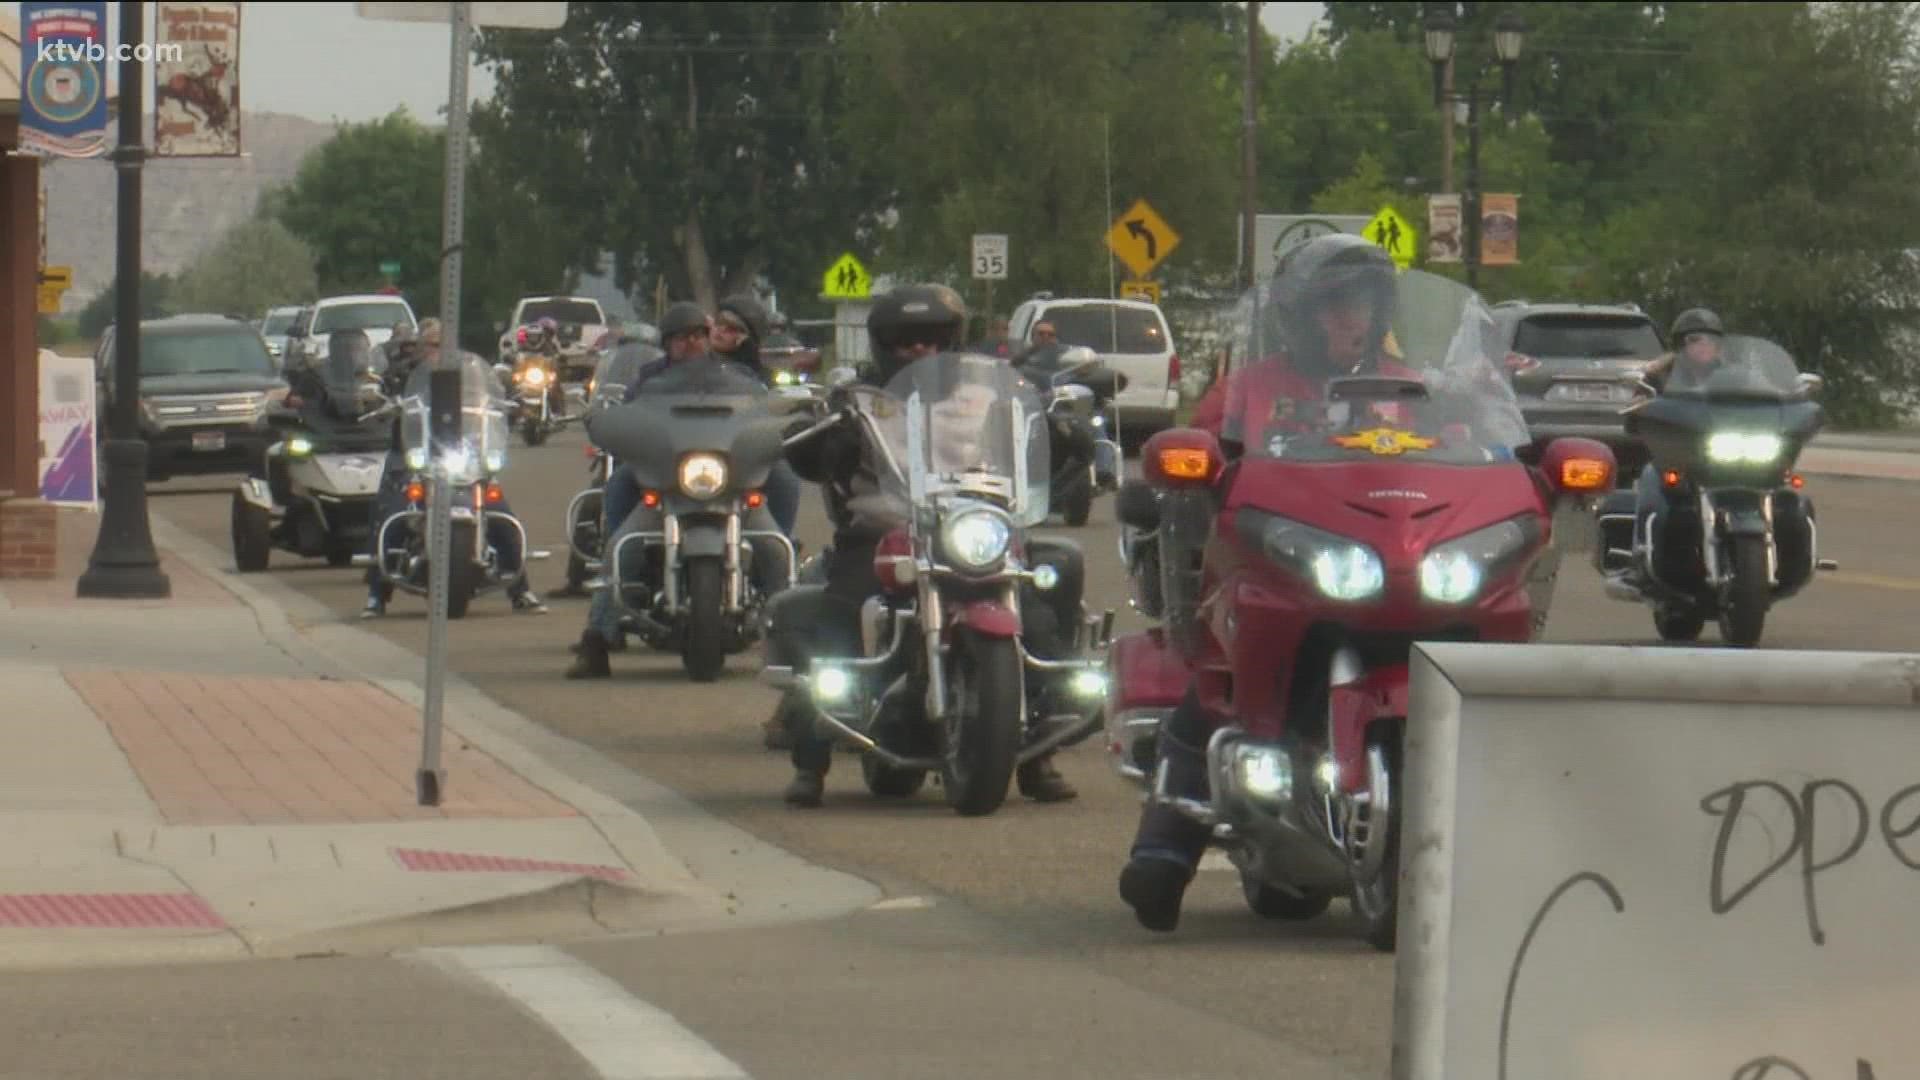 The Treasure Valley Long Riders organized a benefit Saturday called the Bring Monkey Home Poker Ride. All the donations will go towards Michael's family.